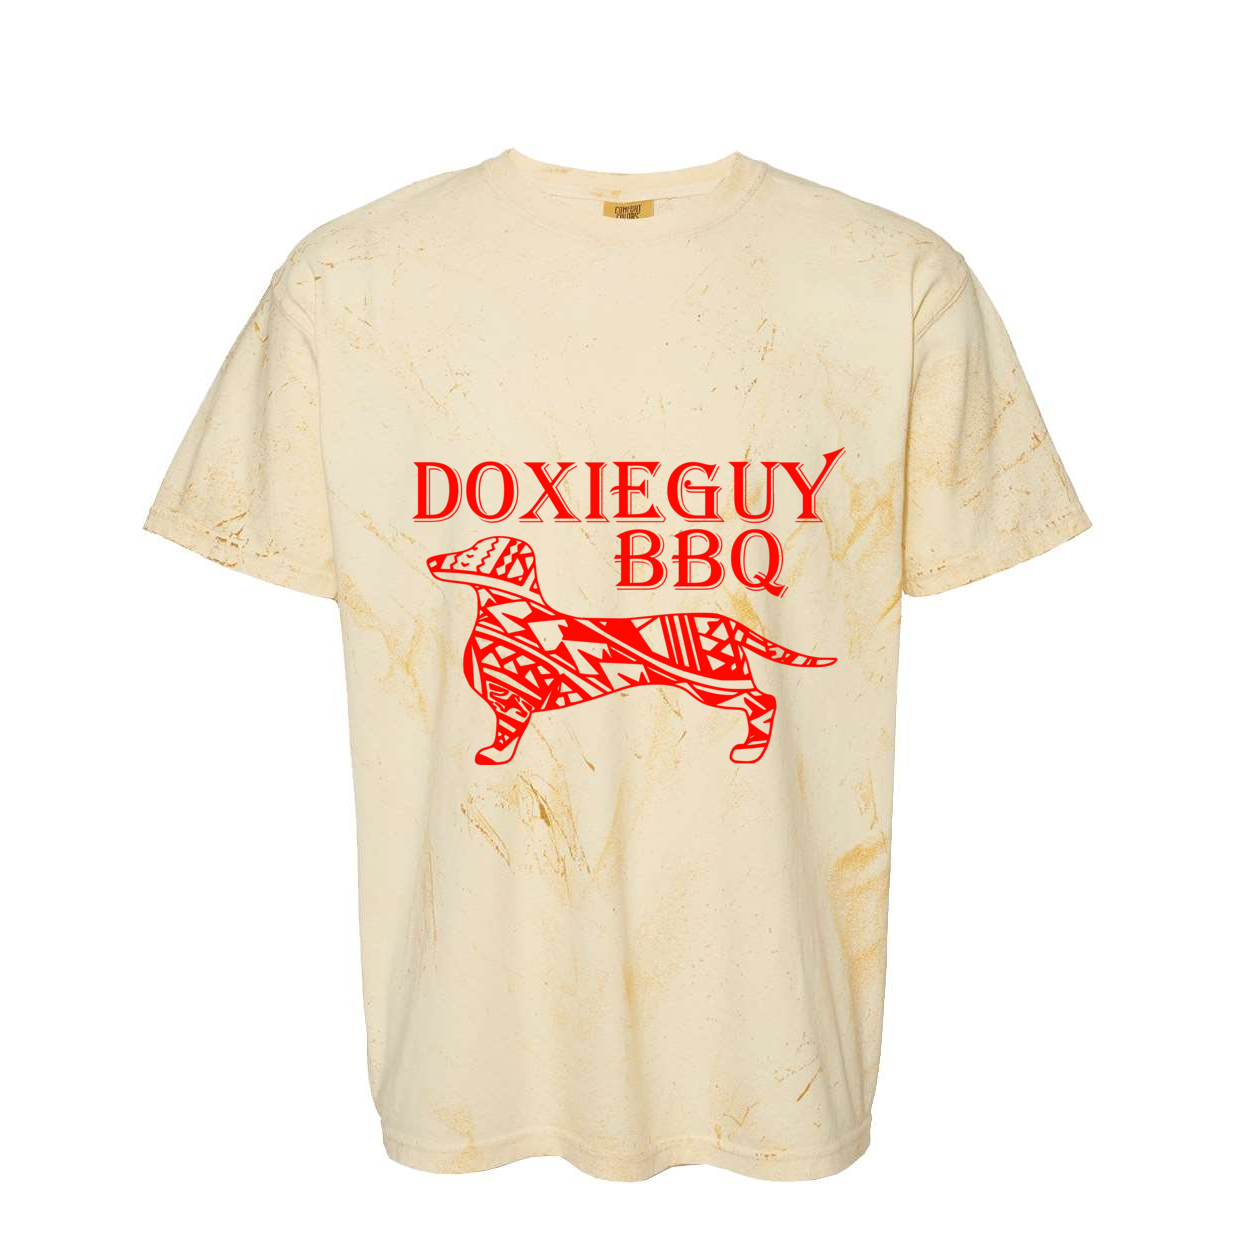 Comfort Colors Colorblast DoxieGuy T-Shirt